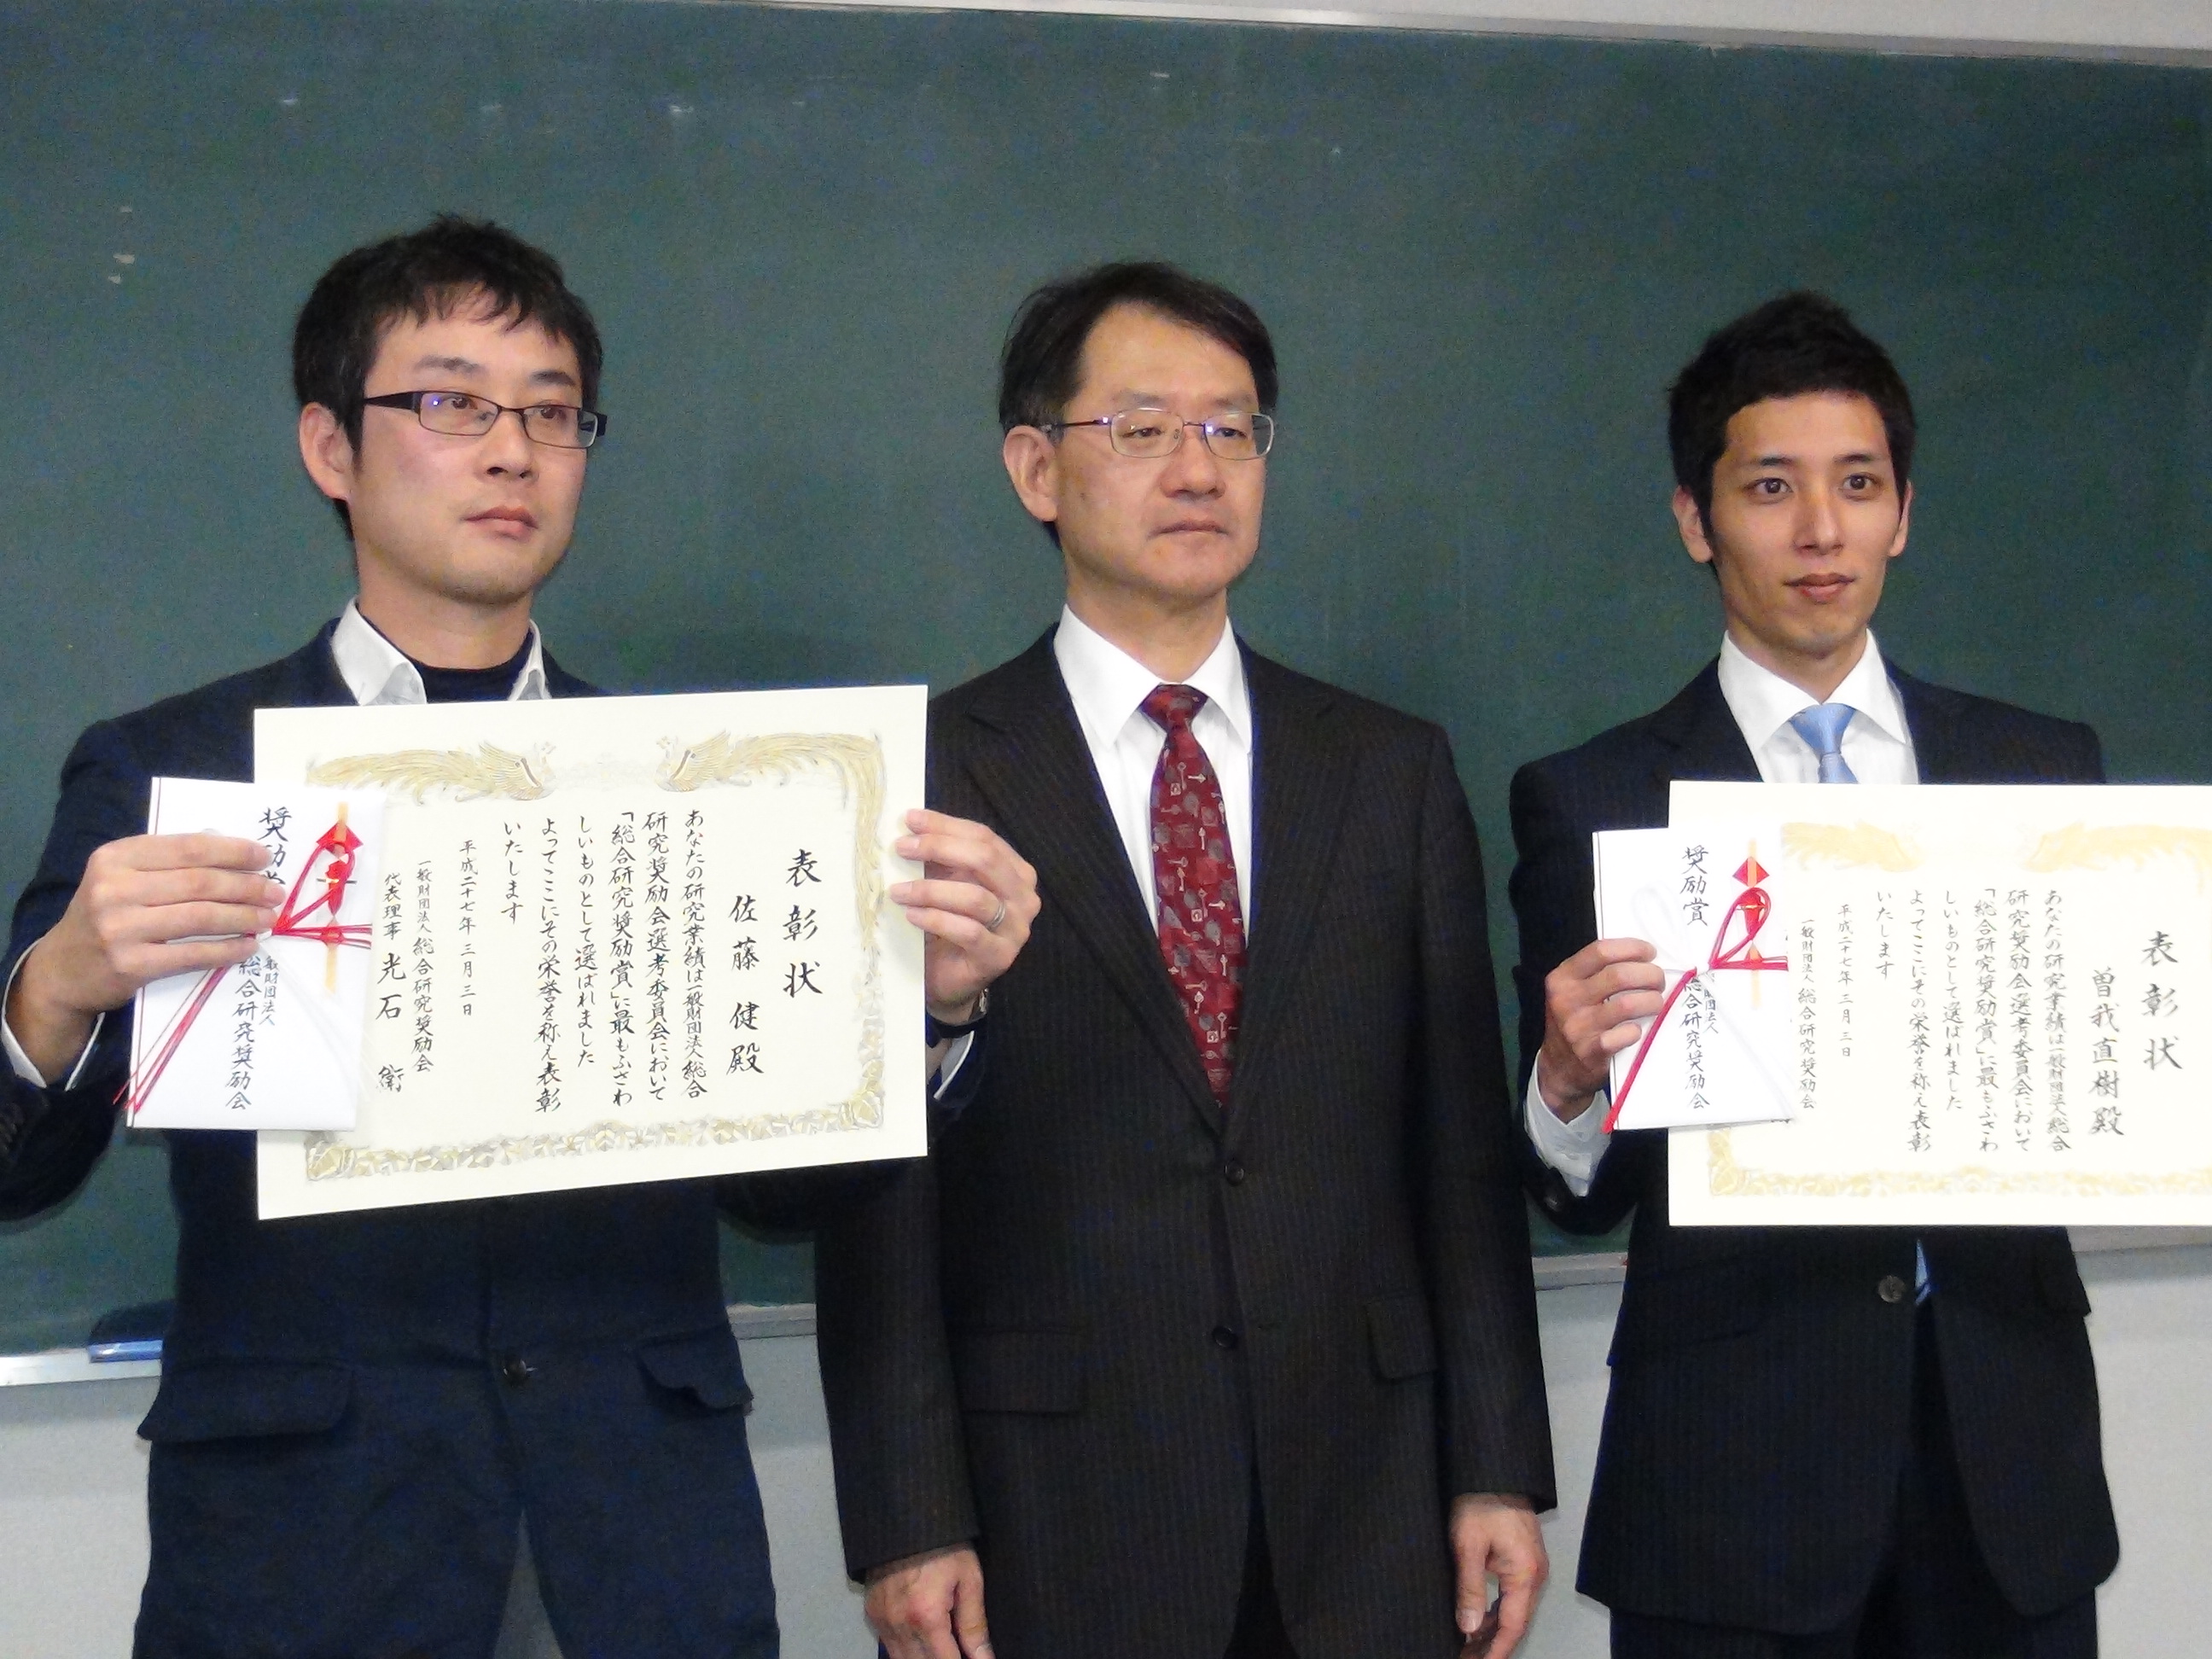 image for Dr. Takeshi Sato received an award!